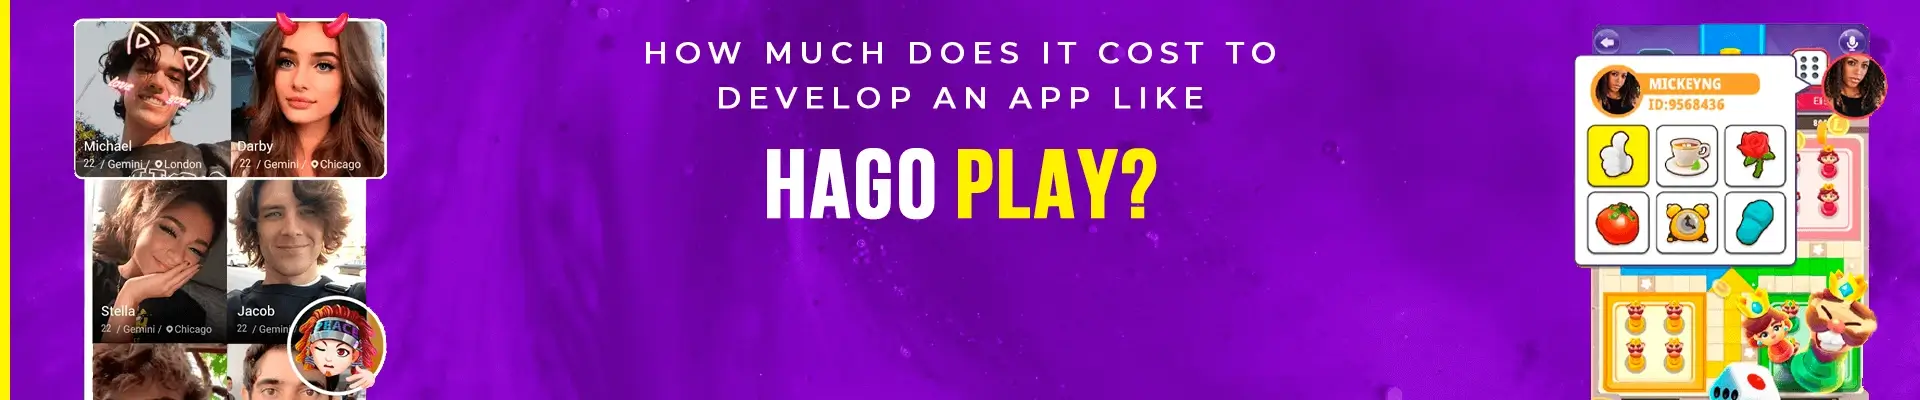 How Much Does It Cost To Develop An App Like Hago Play? [2021]